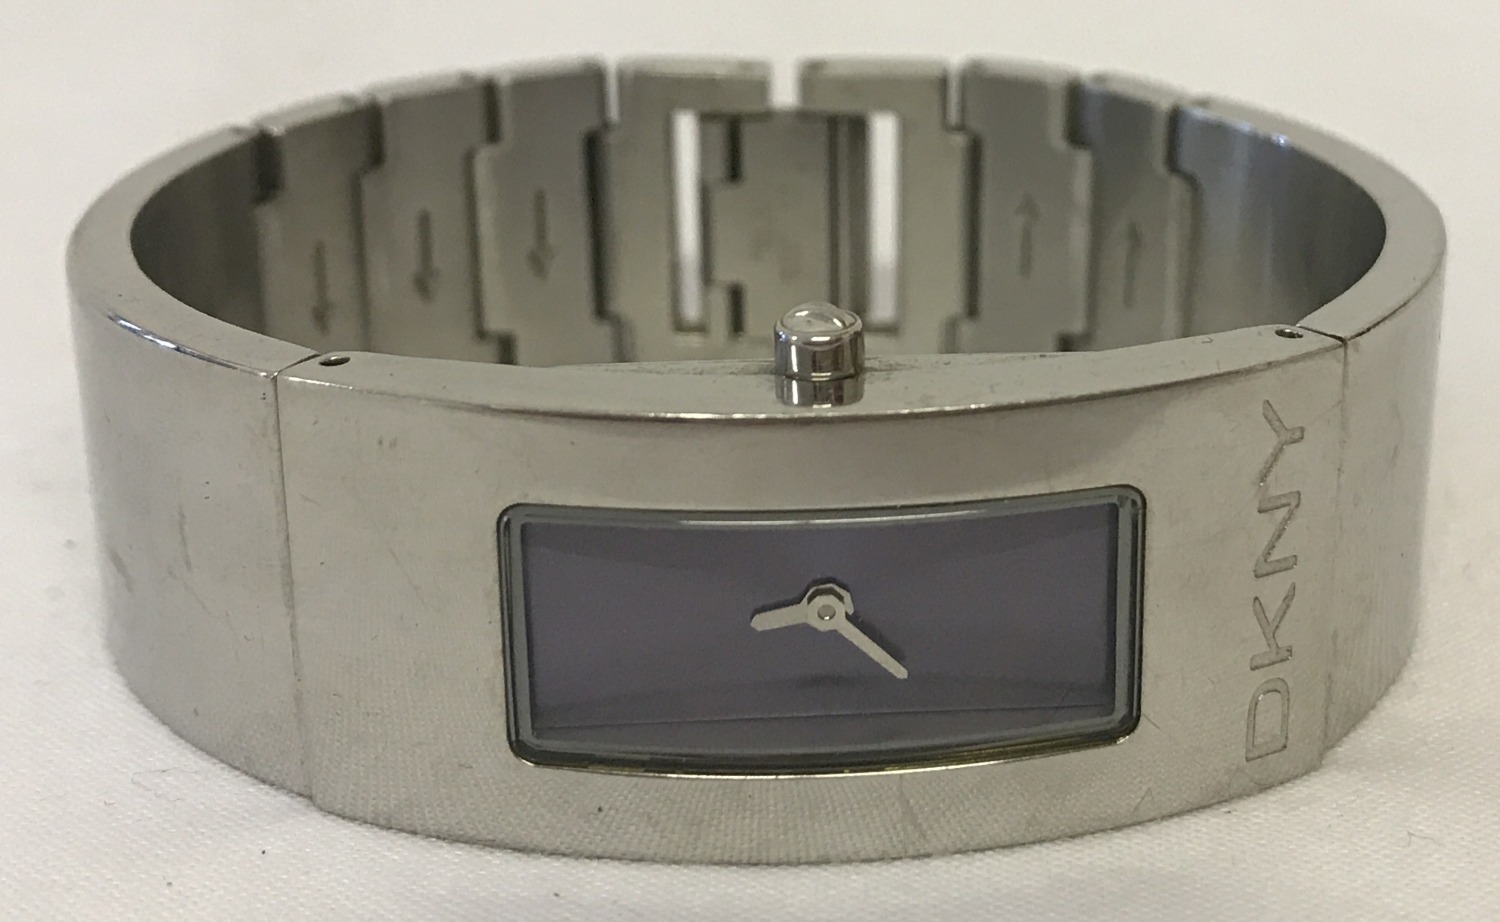 A ladies stainless steel bracelet watch by DKNY. Blue metallic face with silver hands.